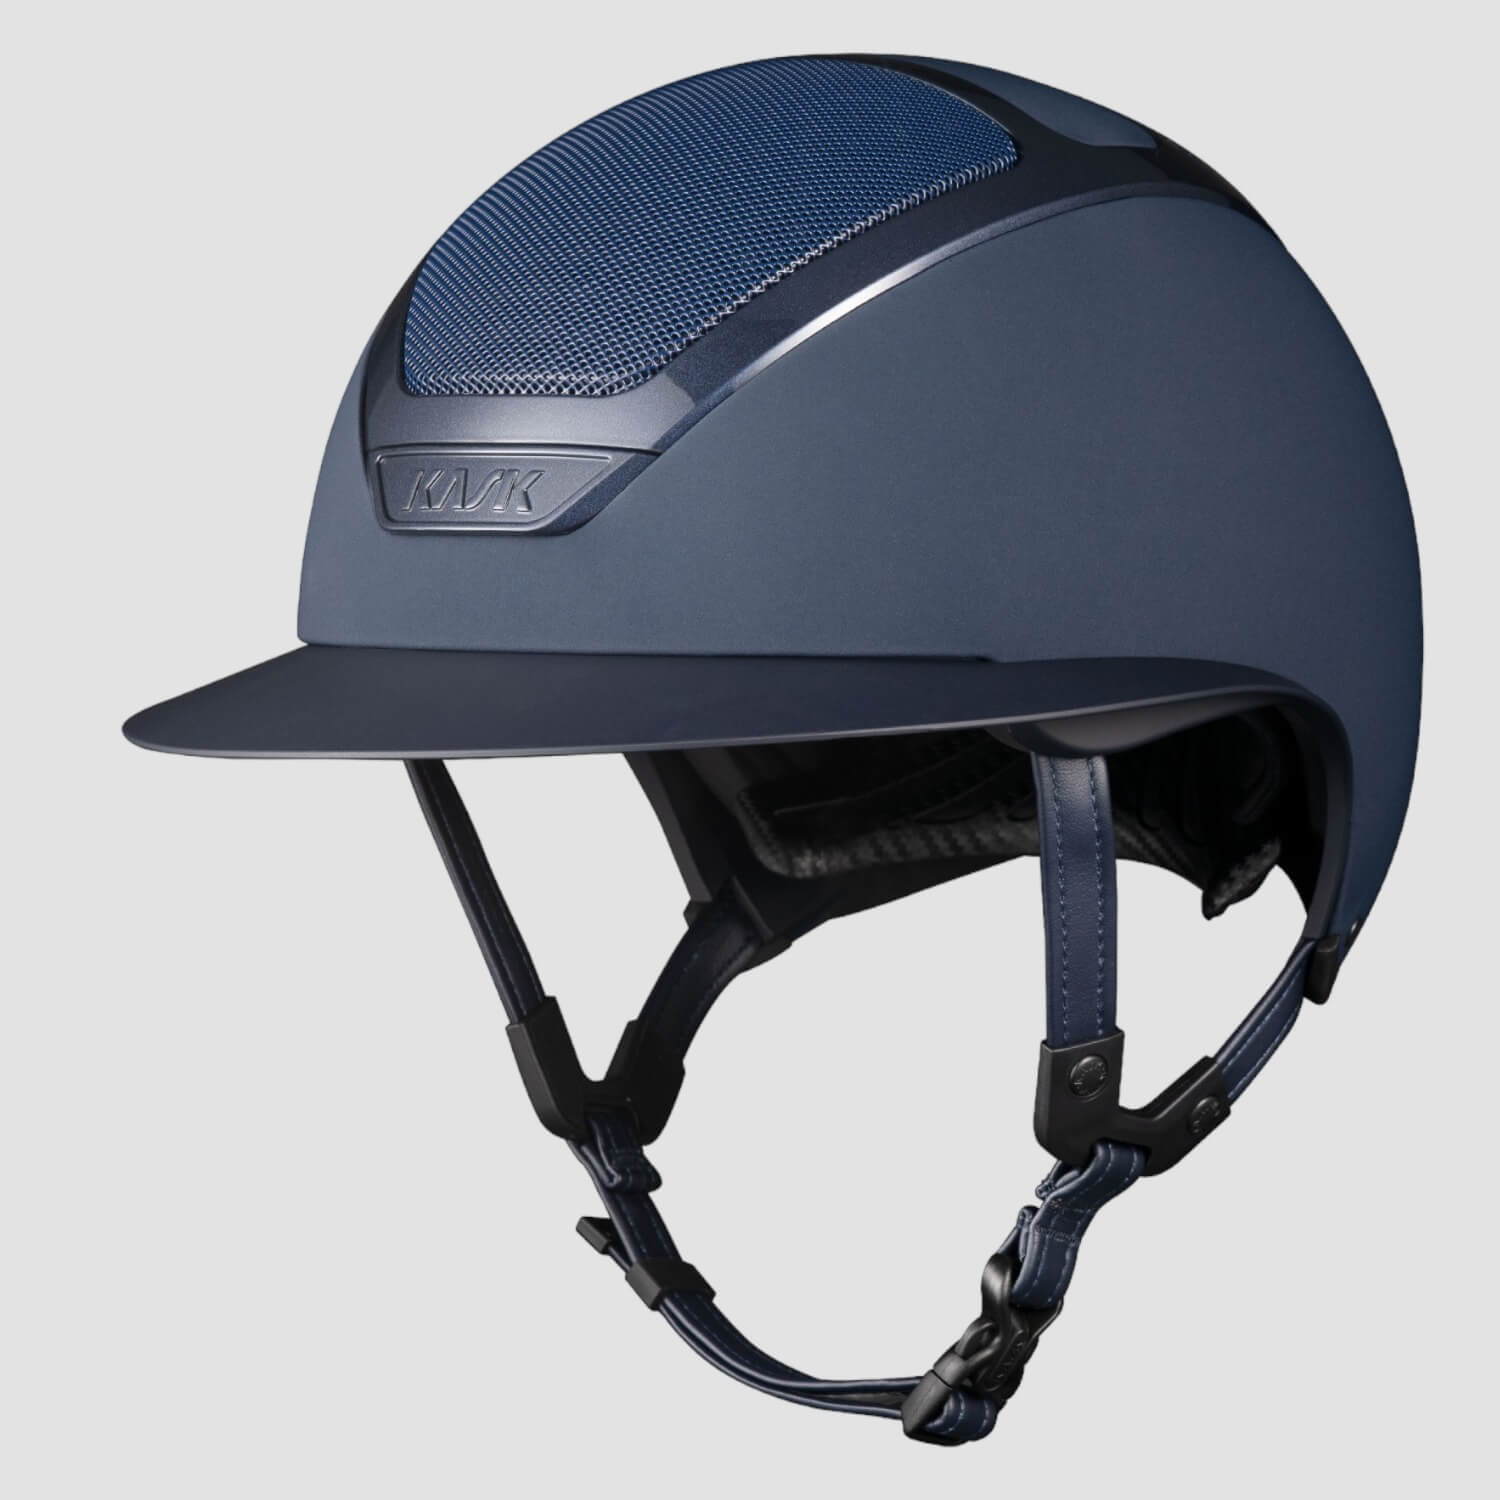 Kask Star Lady chrome Navy neues Modell